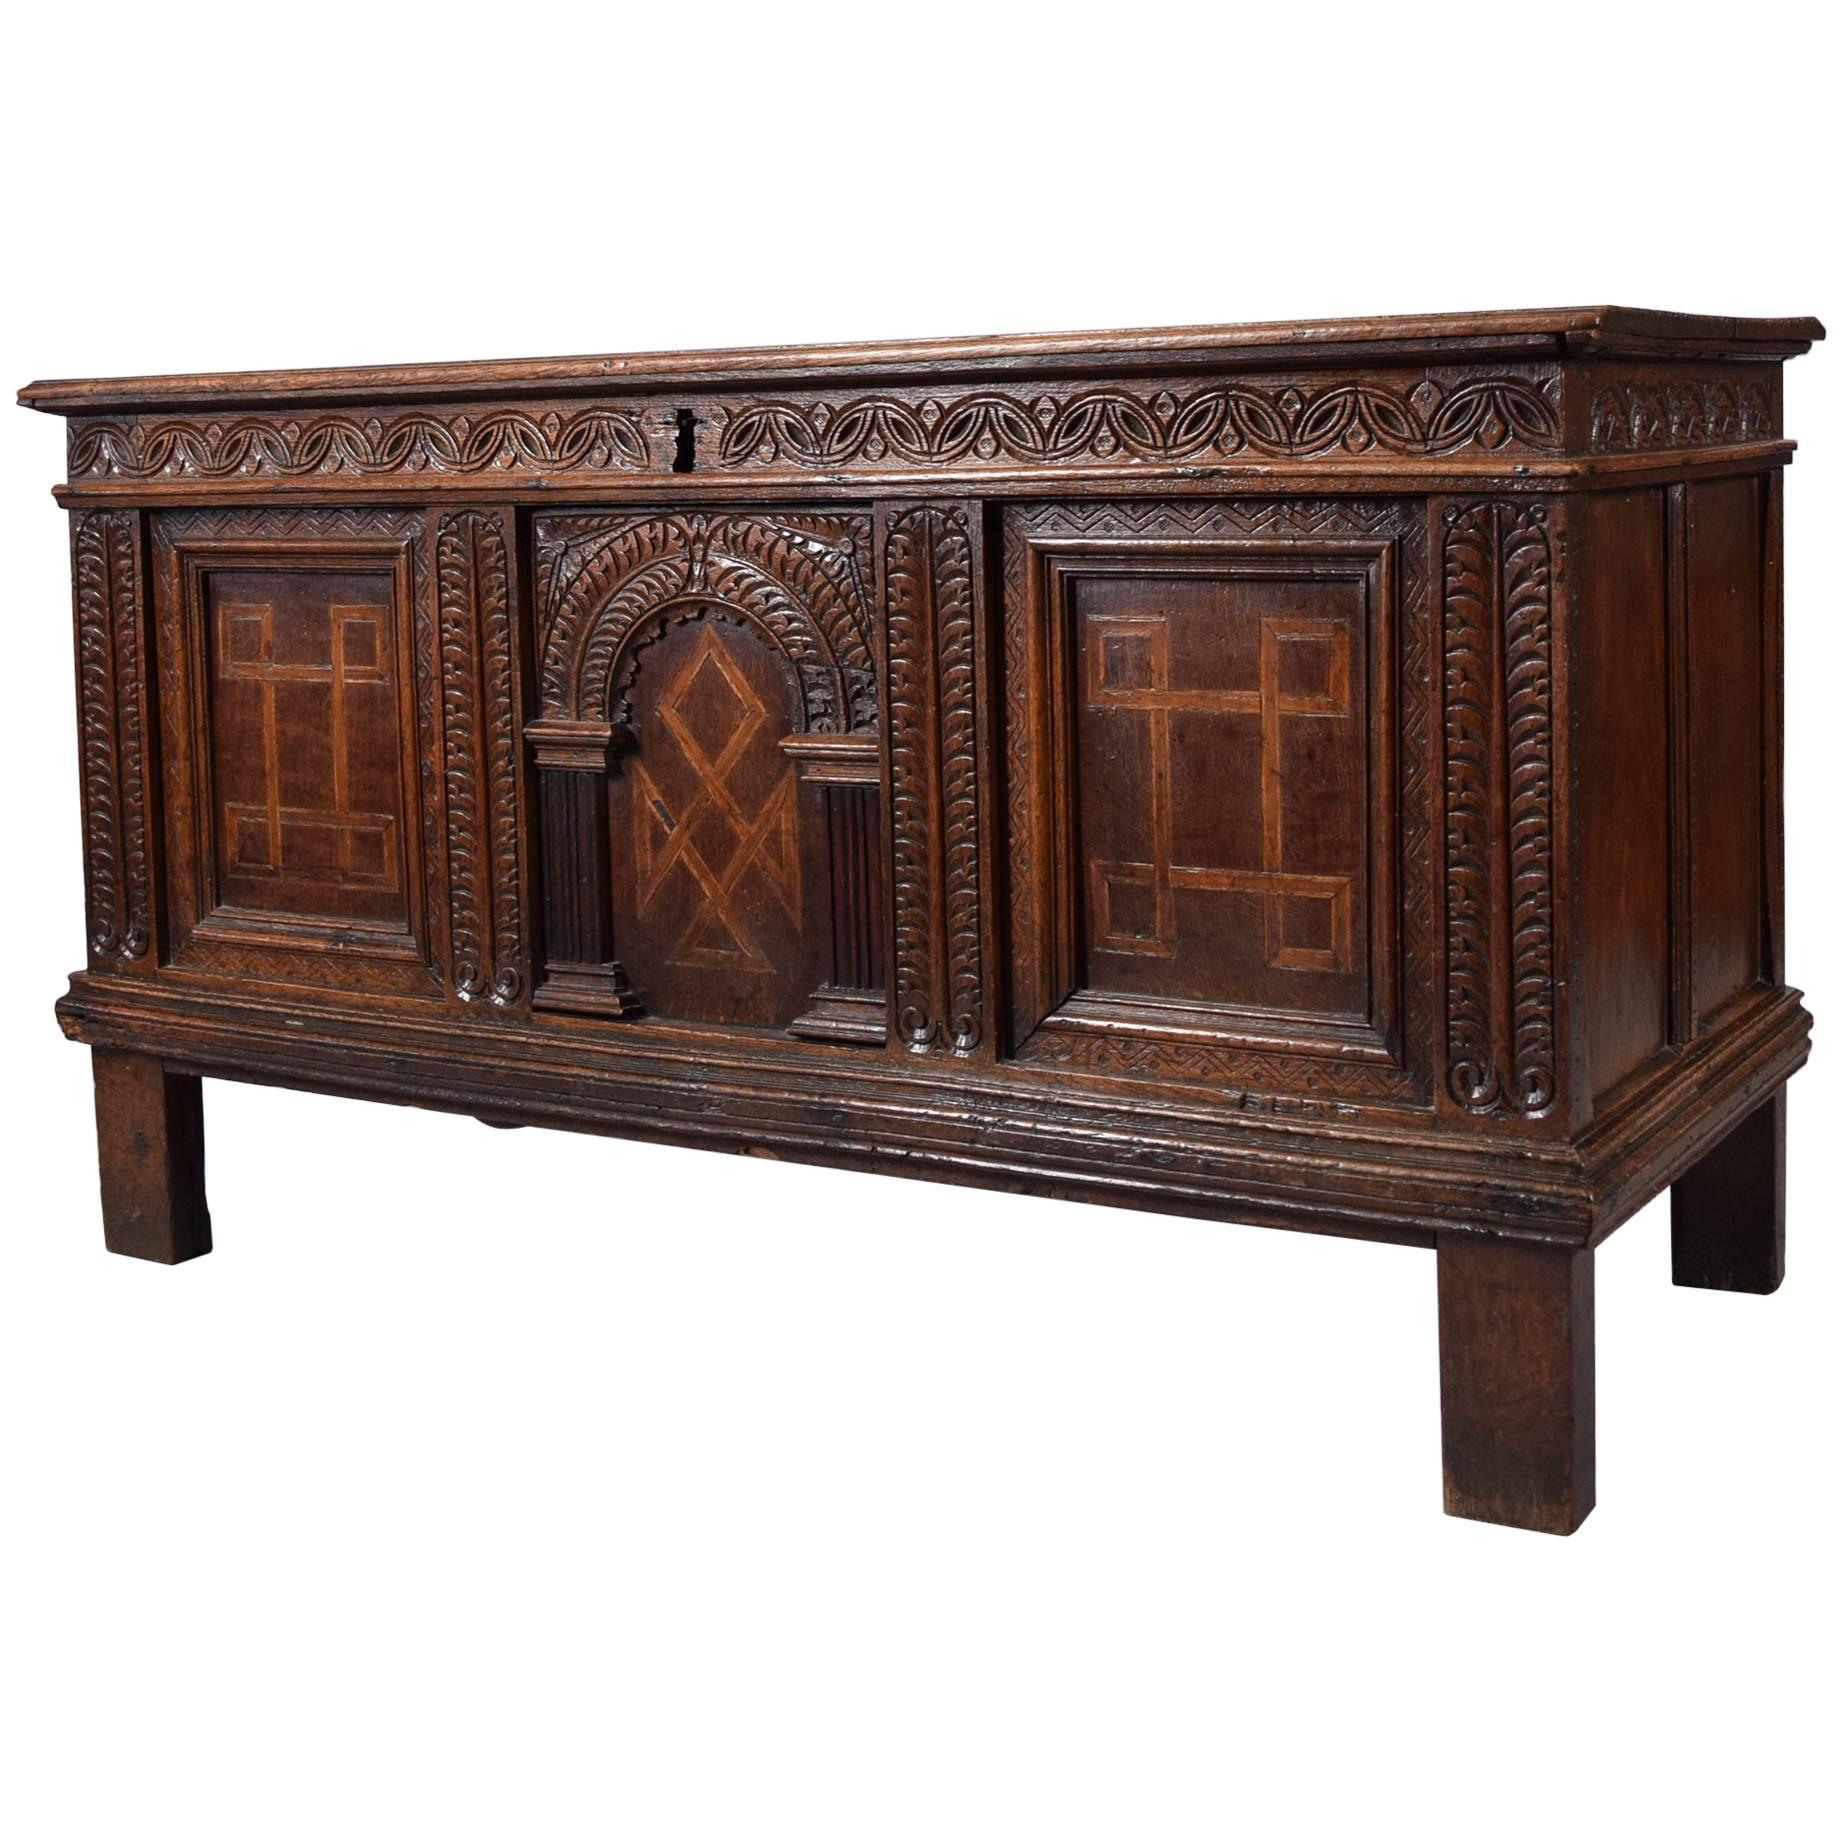 Fine Stuart Inlaid and Carved Oak Coffer, Early 17th Century For Sale